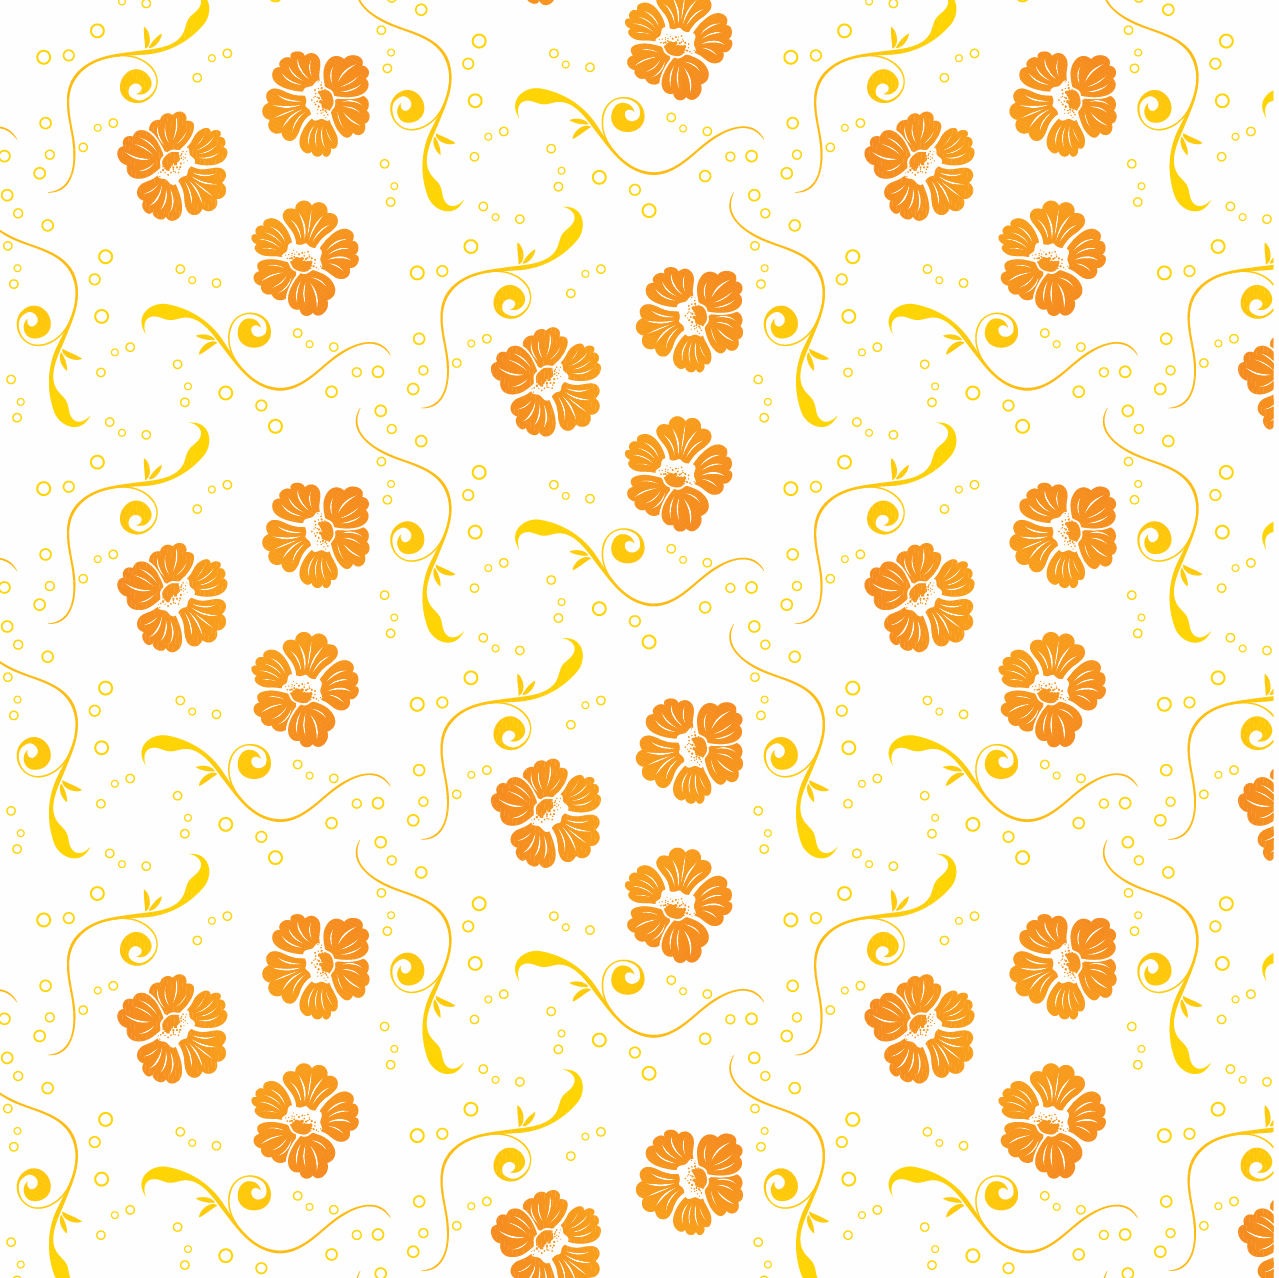 vector free download floral - photo #30